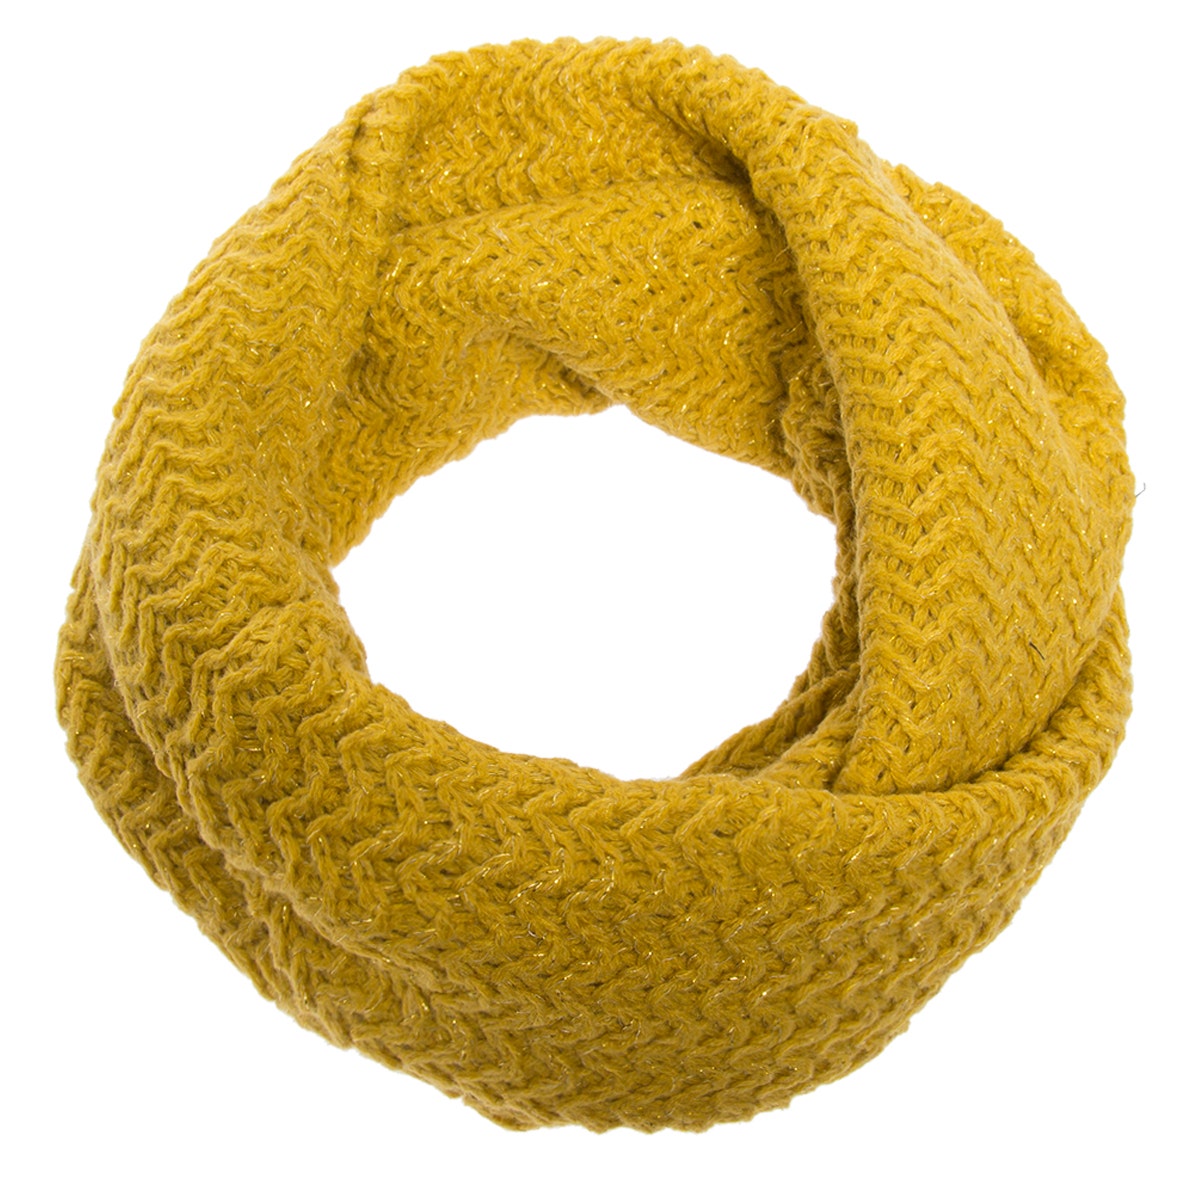 Loop Infinity Scarf With Metallic Knit by The Royal Standard